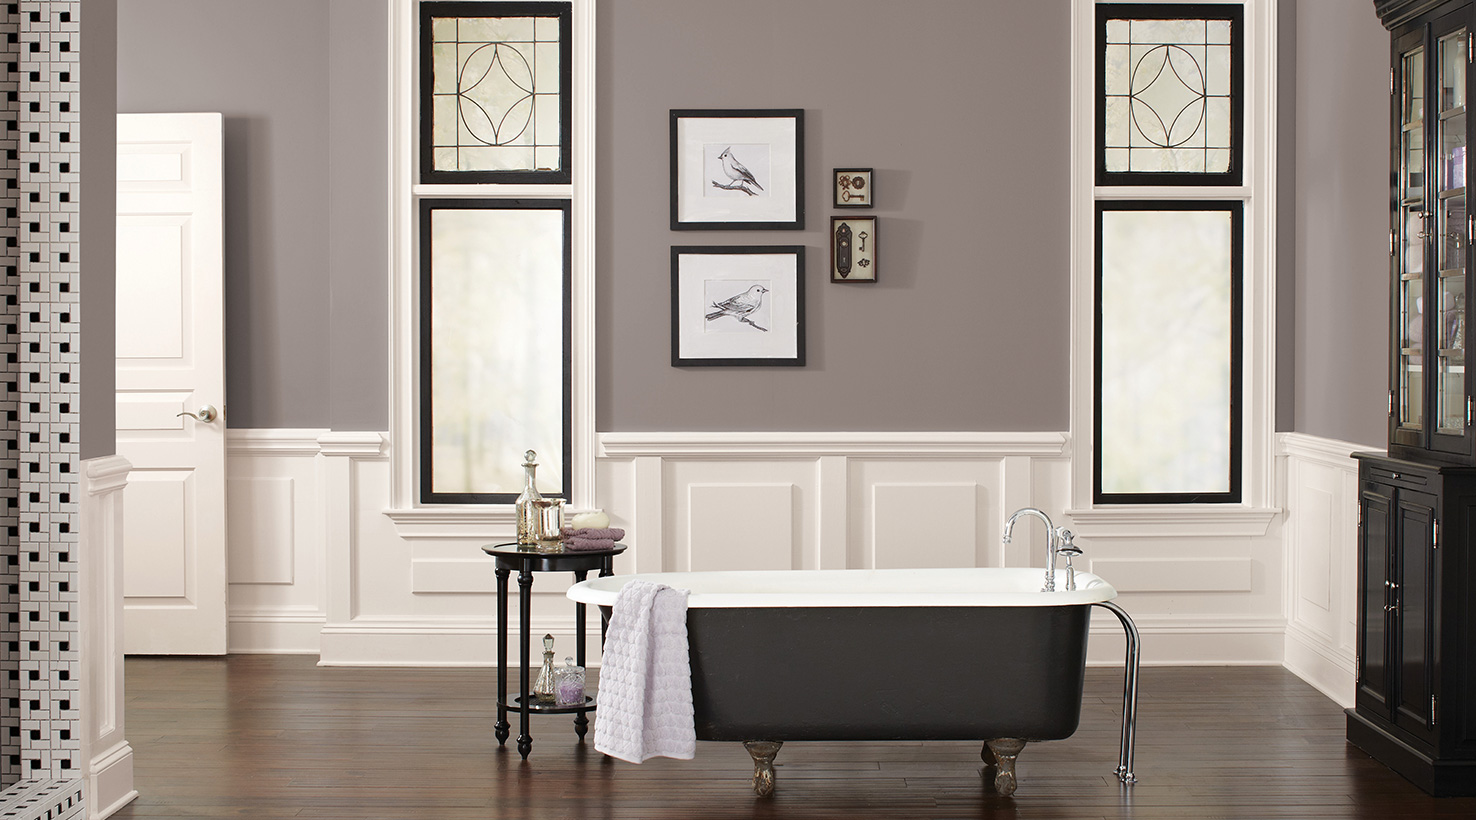 Bathroom Paint Color Ideas Inspiration Gallery Sherwin Williams,Where To Hang Curtains On Window